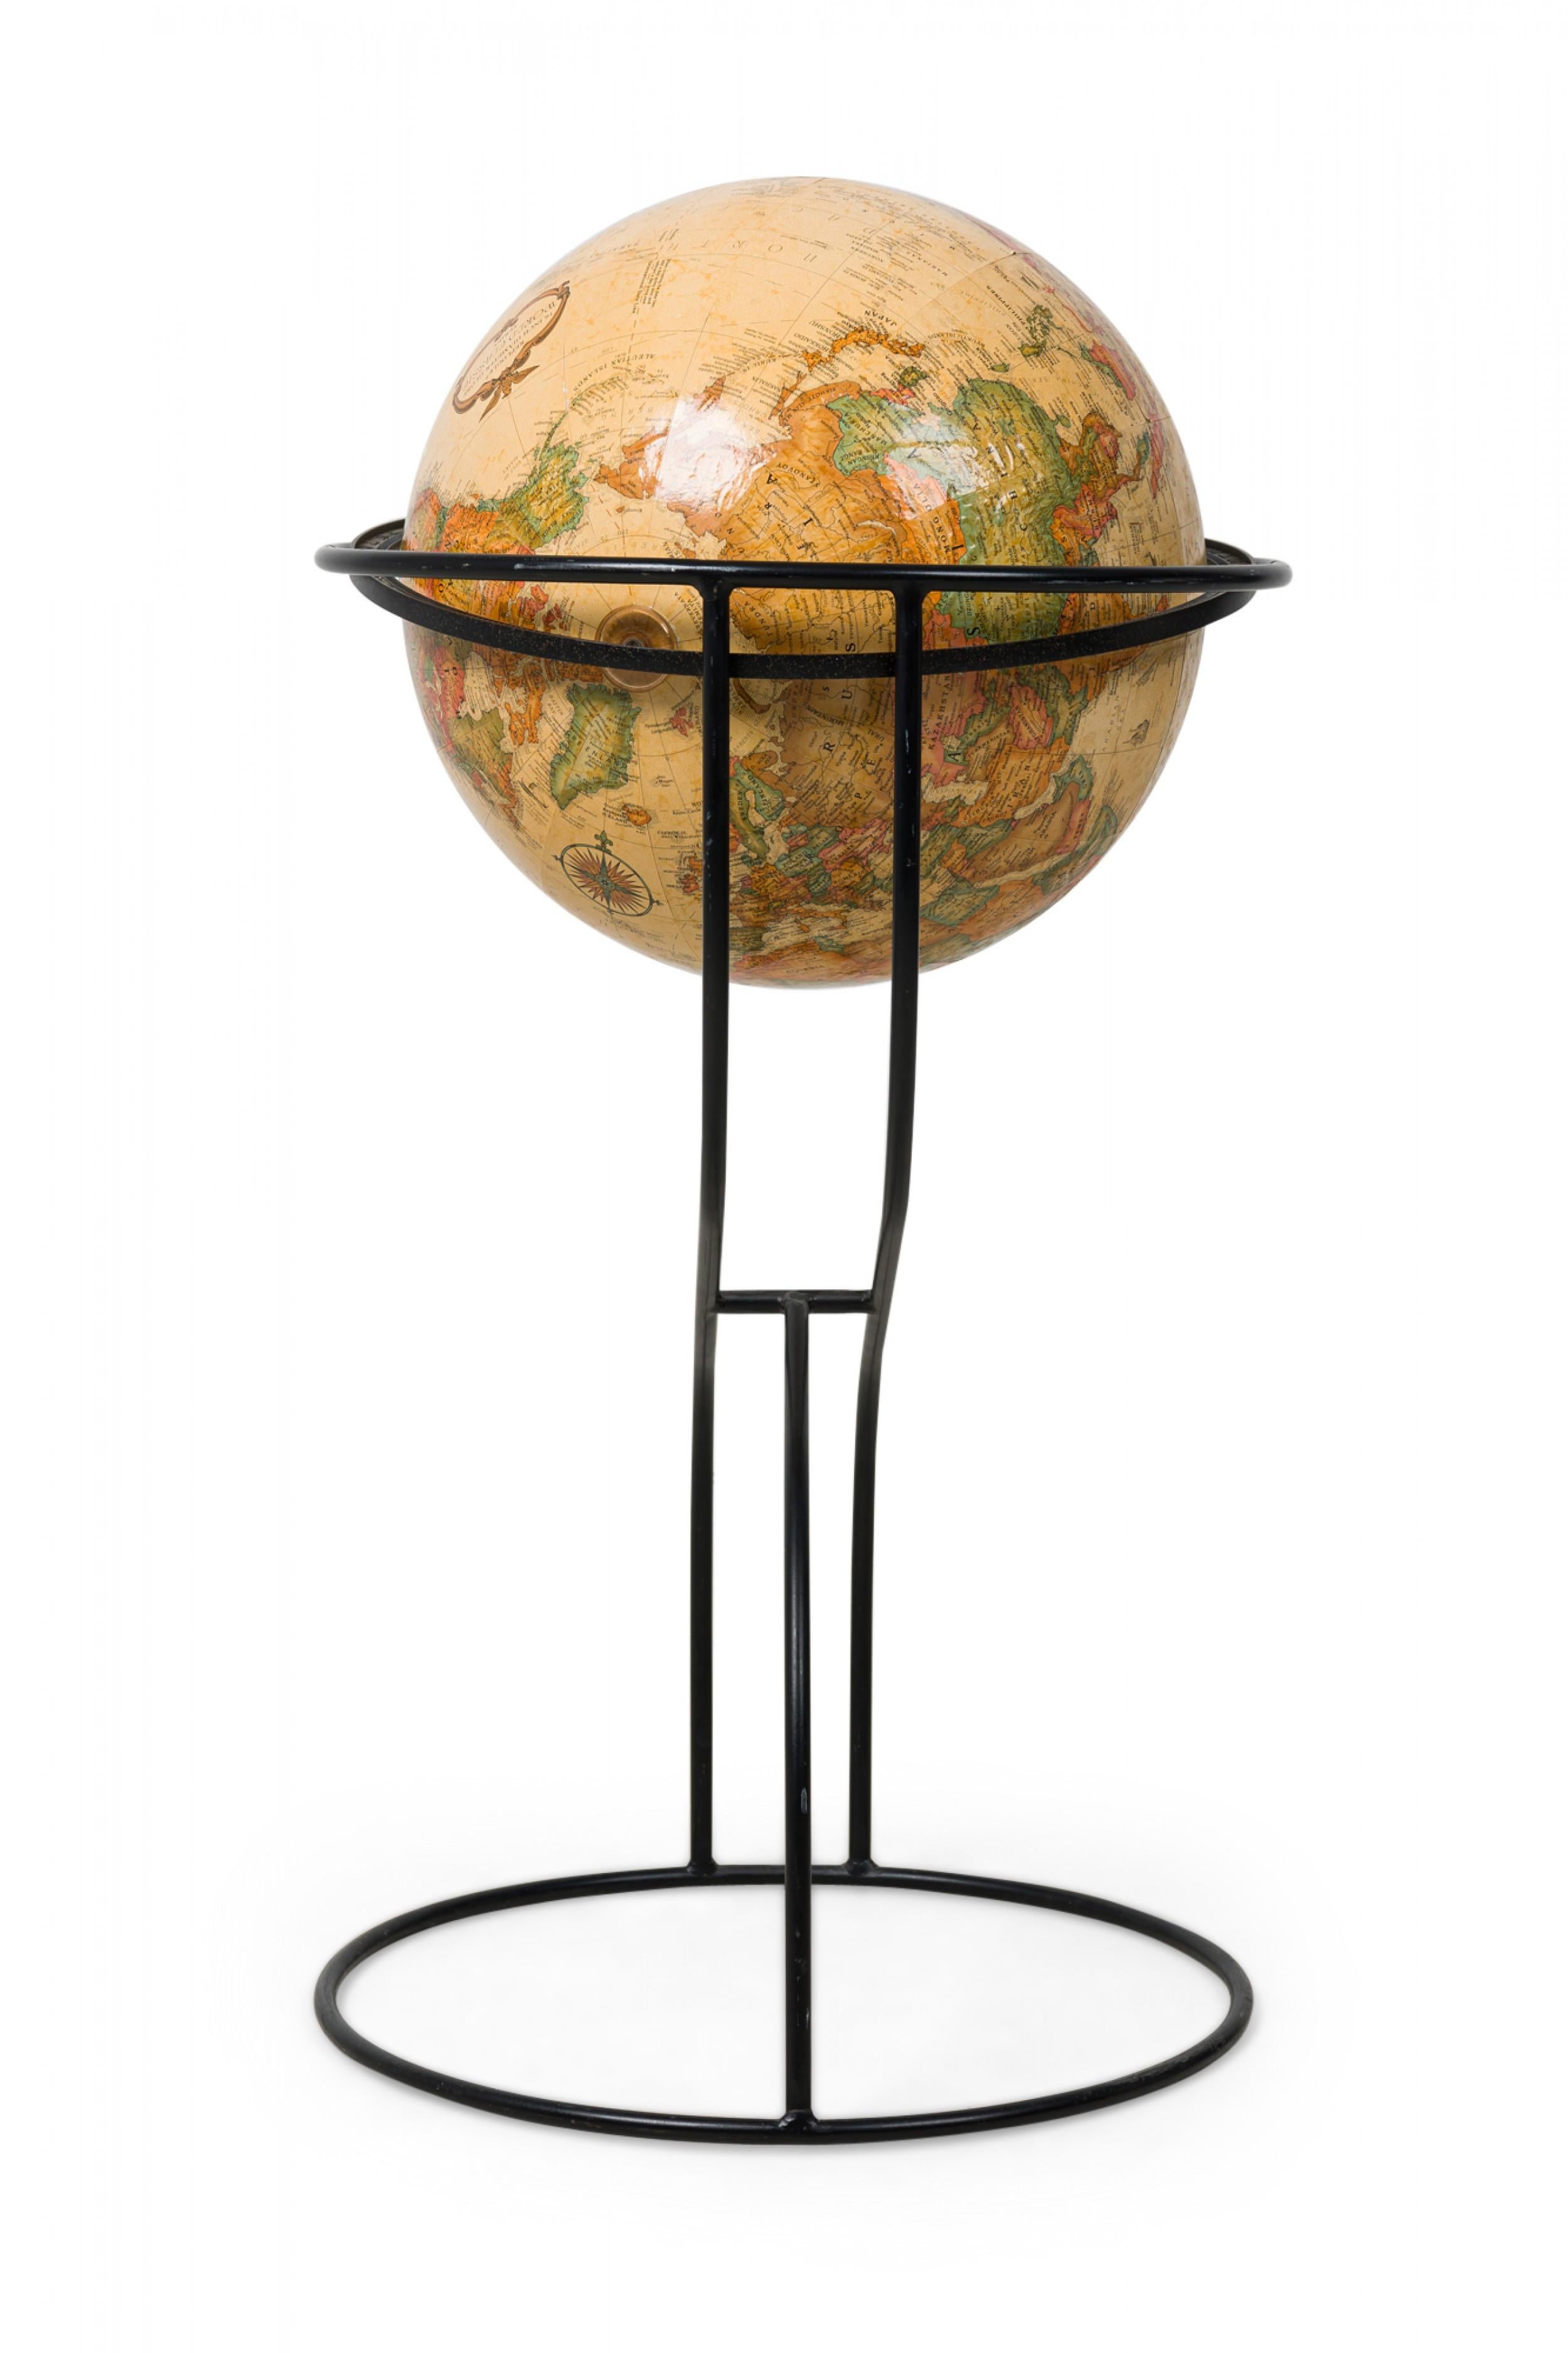 Vintage American Modern globe of the world resting on a curved cantilevered black metal stand (REPLOGLE).